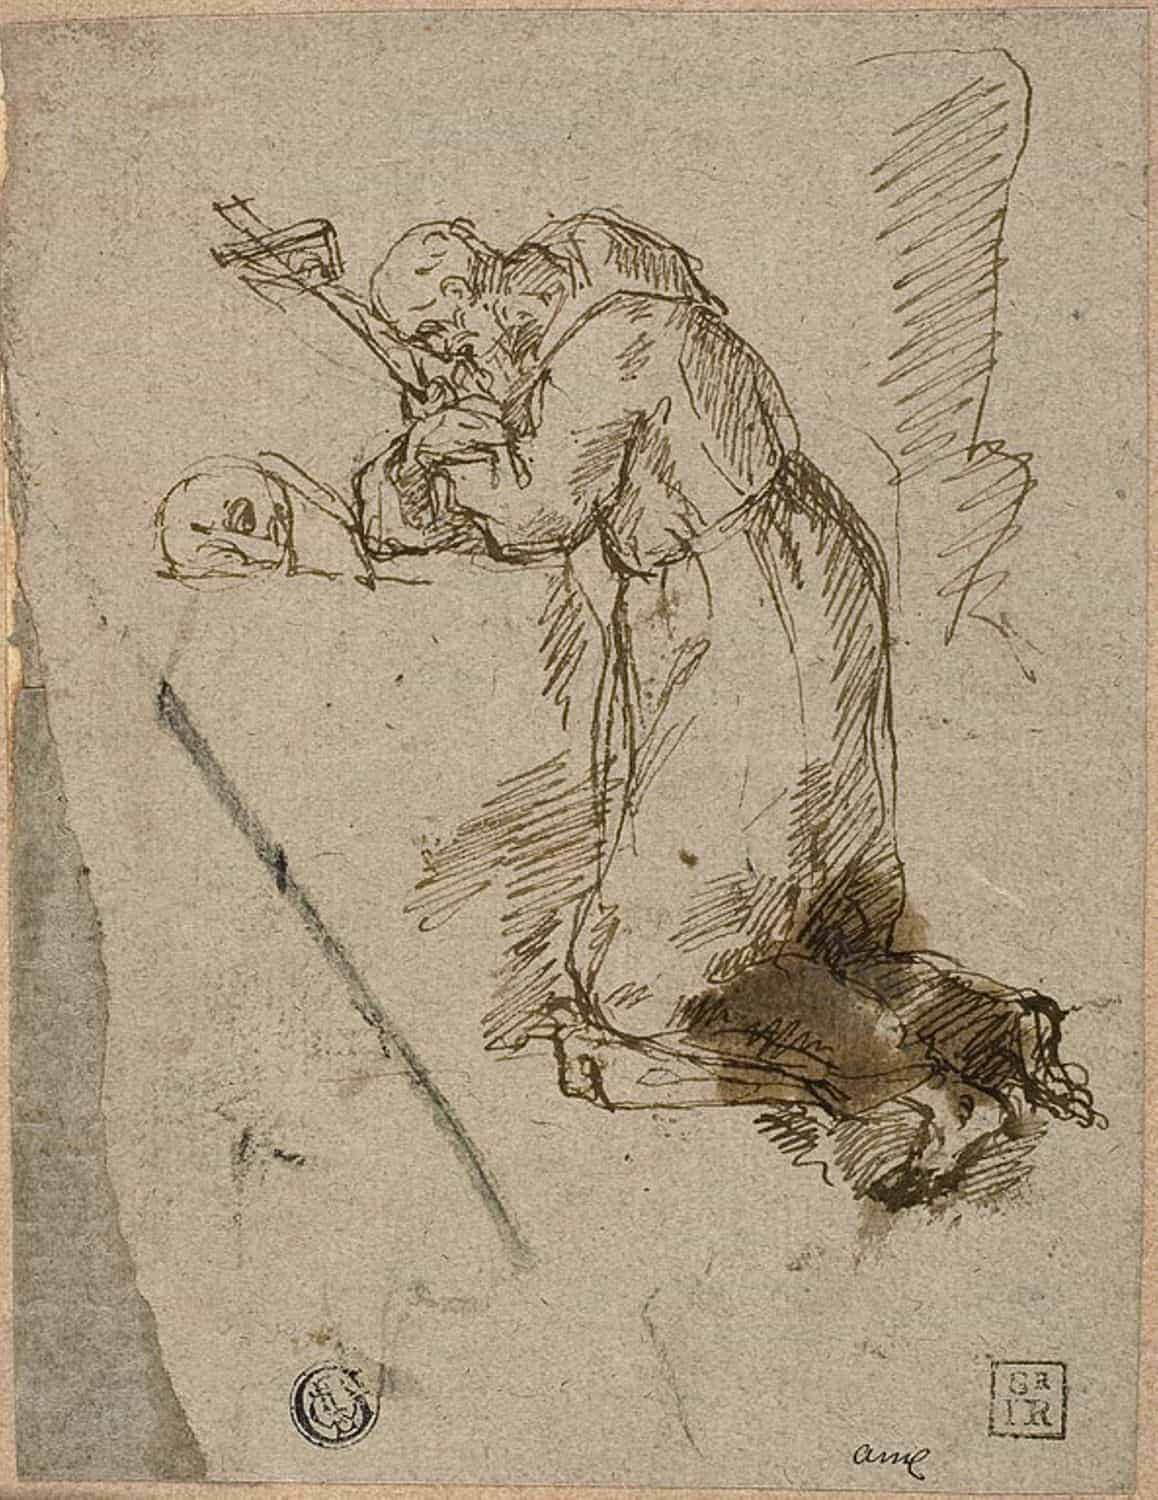 Seated Man Painting or Writing, first half 17th century, The Metropolitan Museum of Art (article on starting a journaling practice)